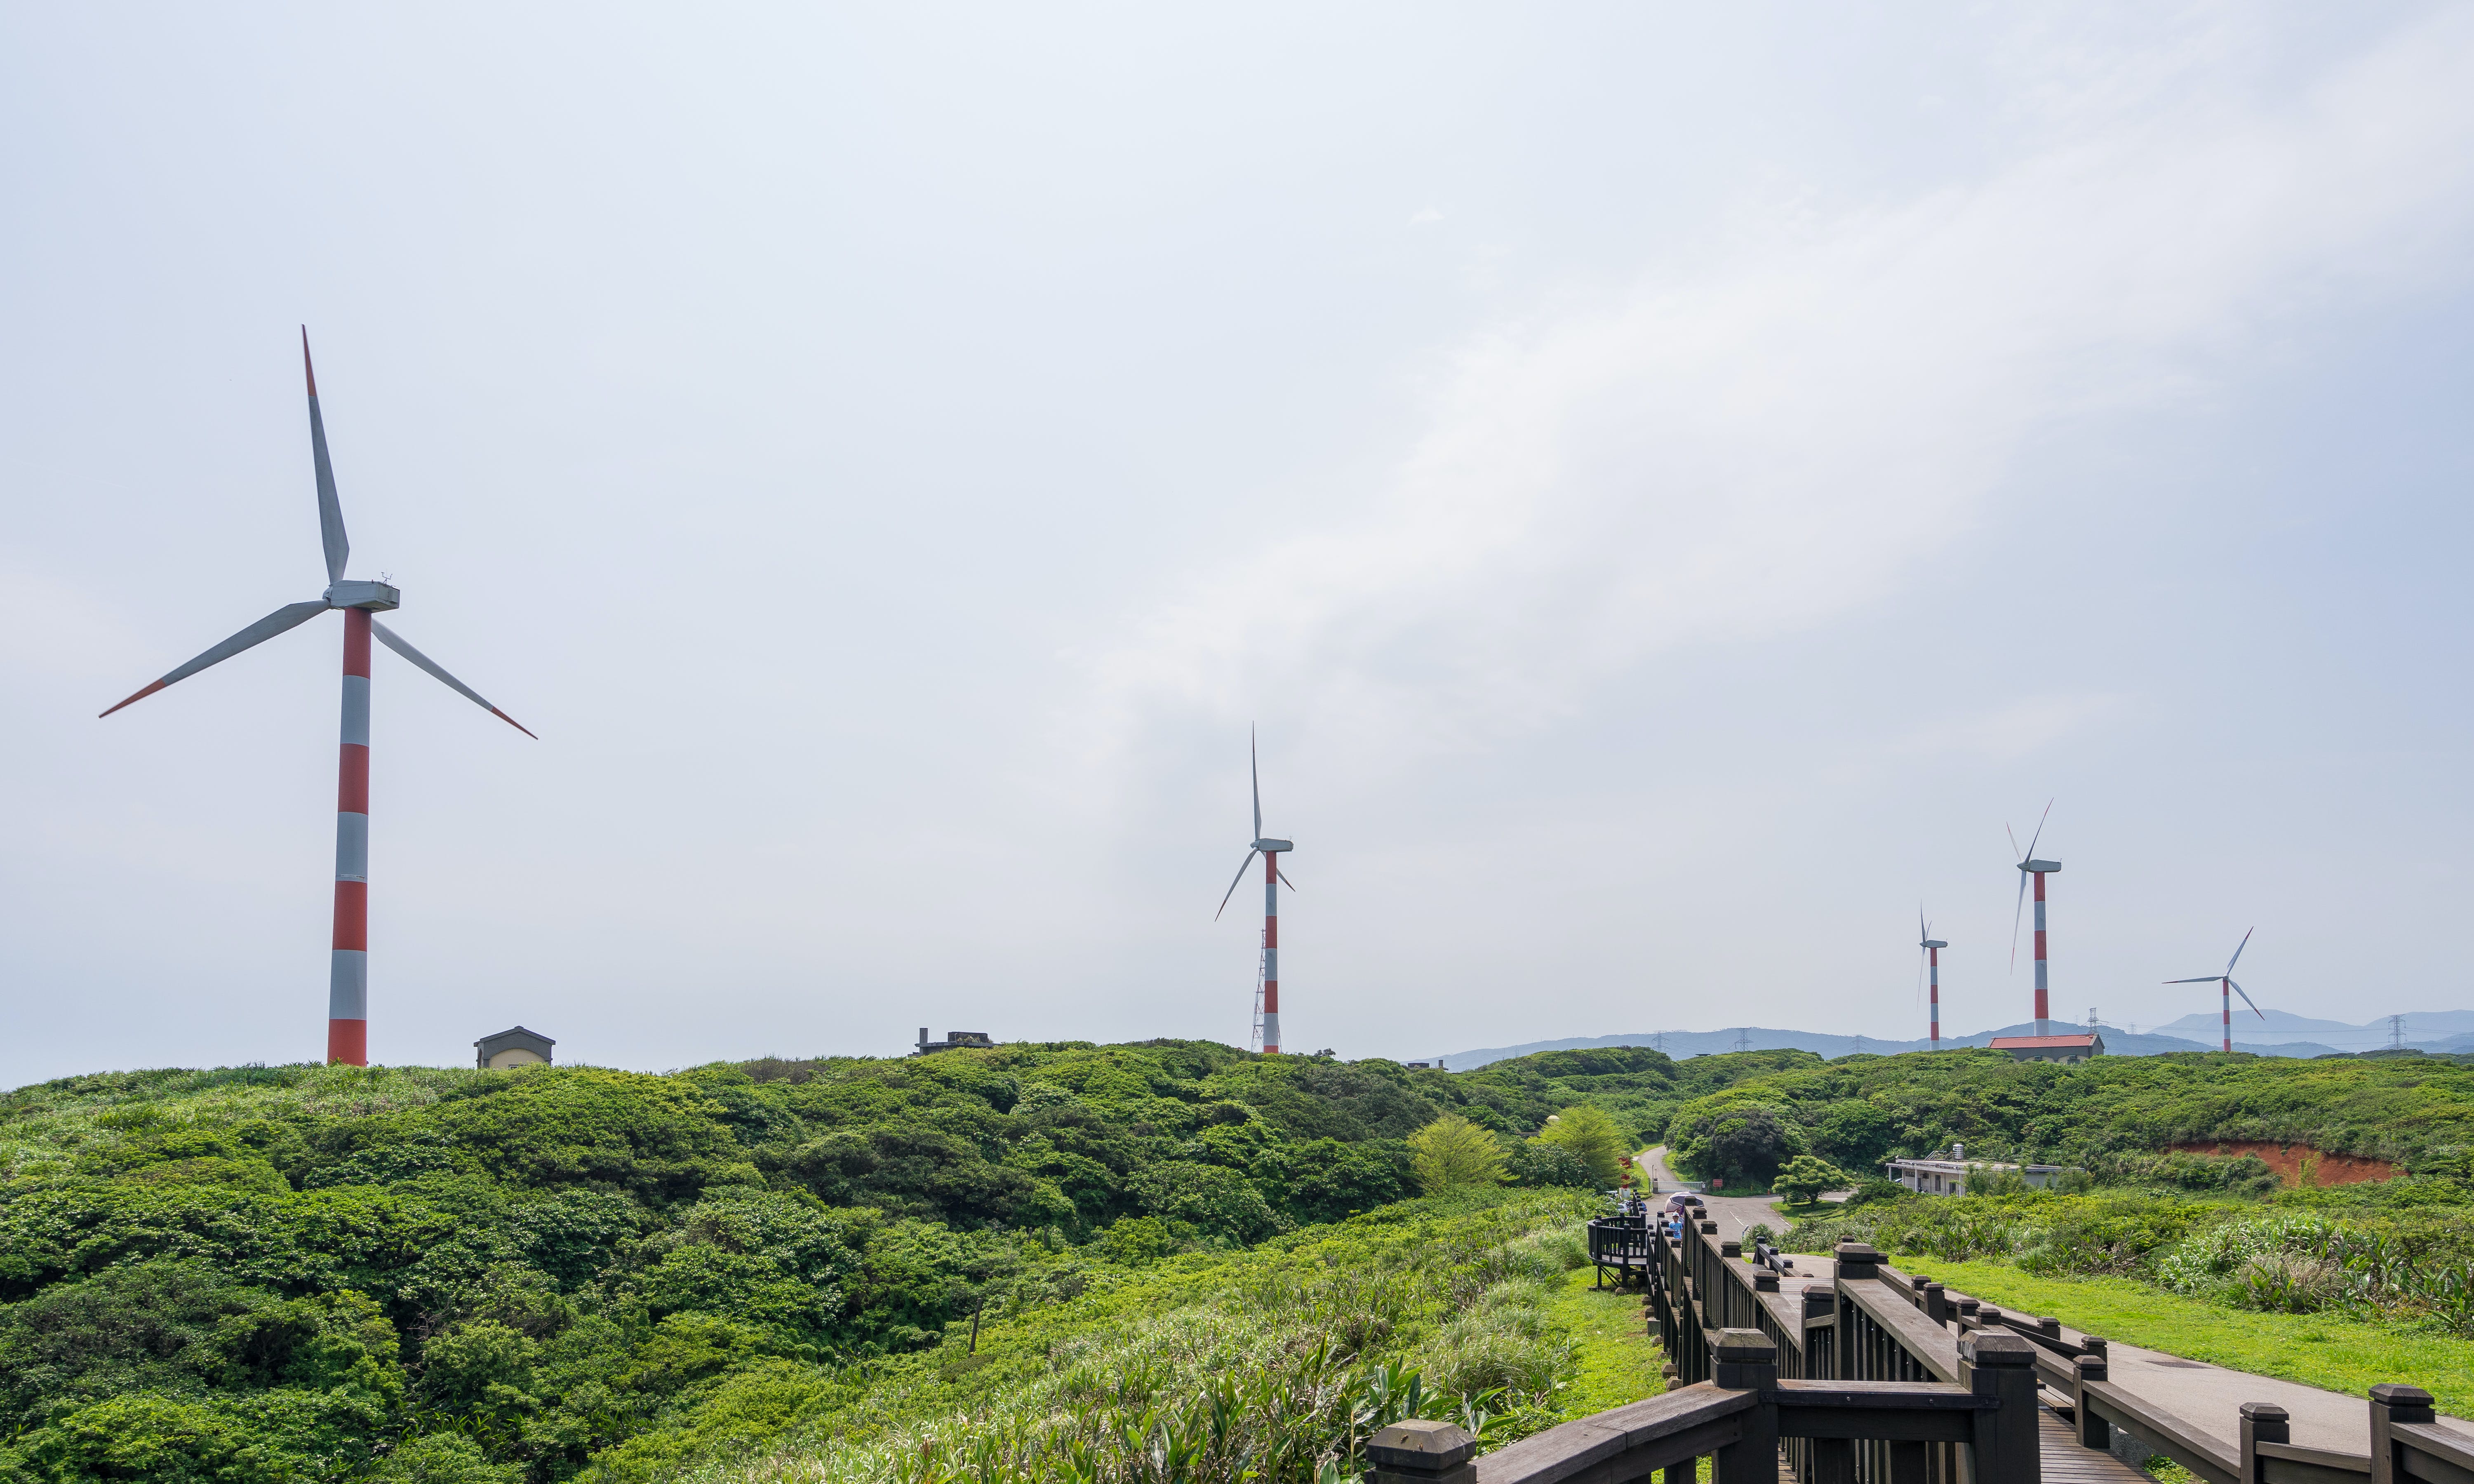 What Feed-in Tariff Controversy? Why Taiwan's Wind Power Future Looks Bright